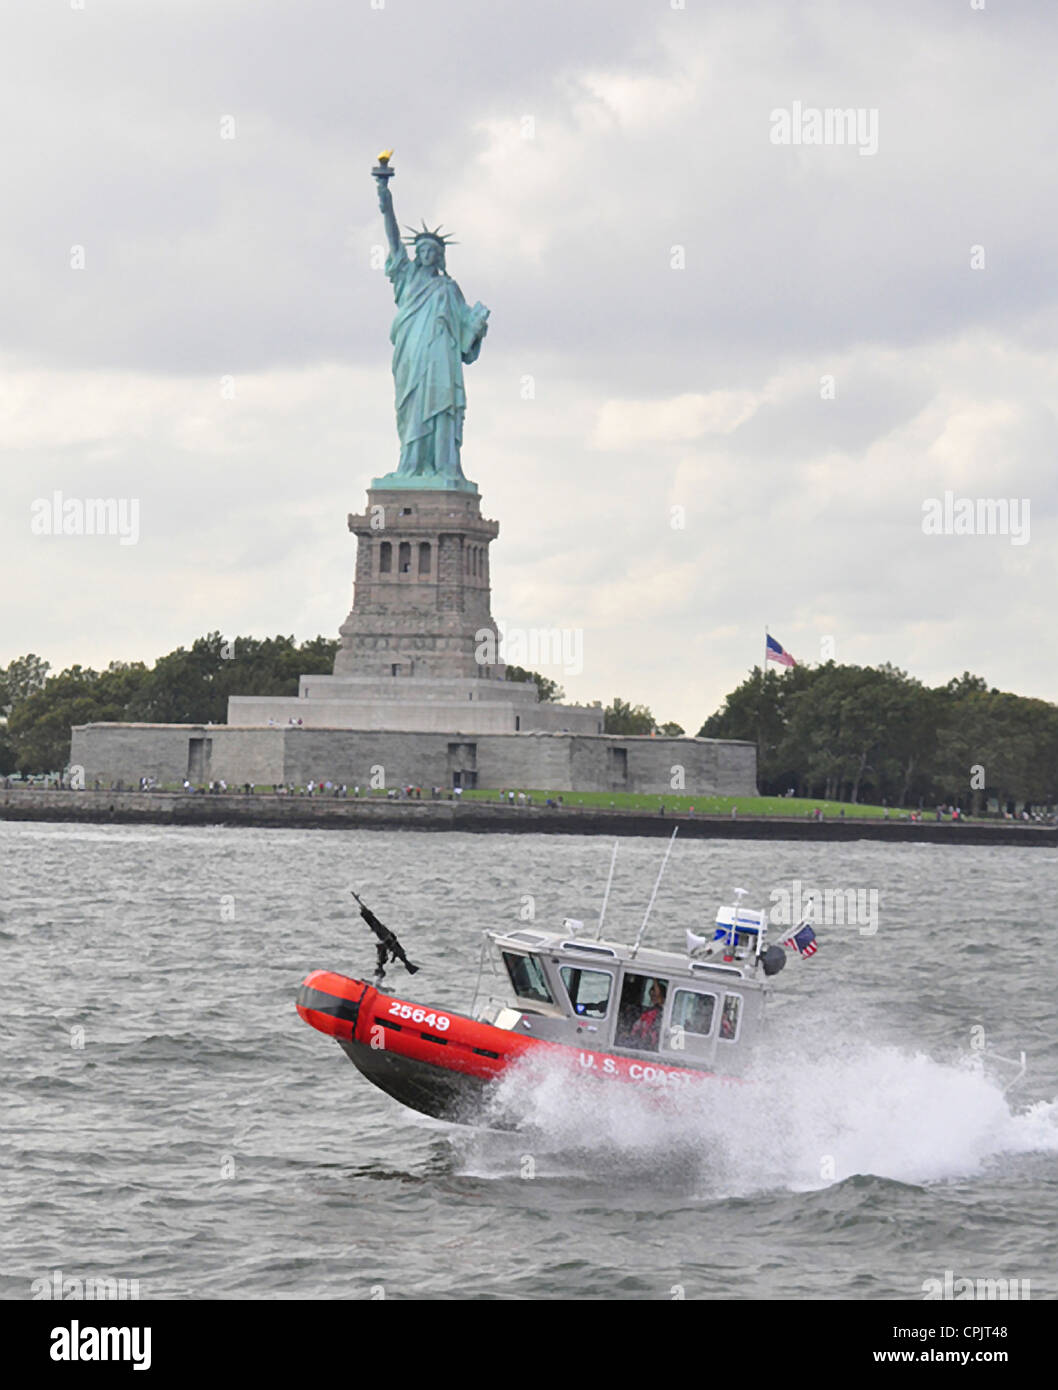 A USCG 25-foot rapid response boat patrols New York harbor past the Statue of Liberty September 23, 2009 in New York, NY. Stock Photo